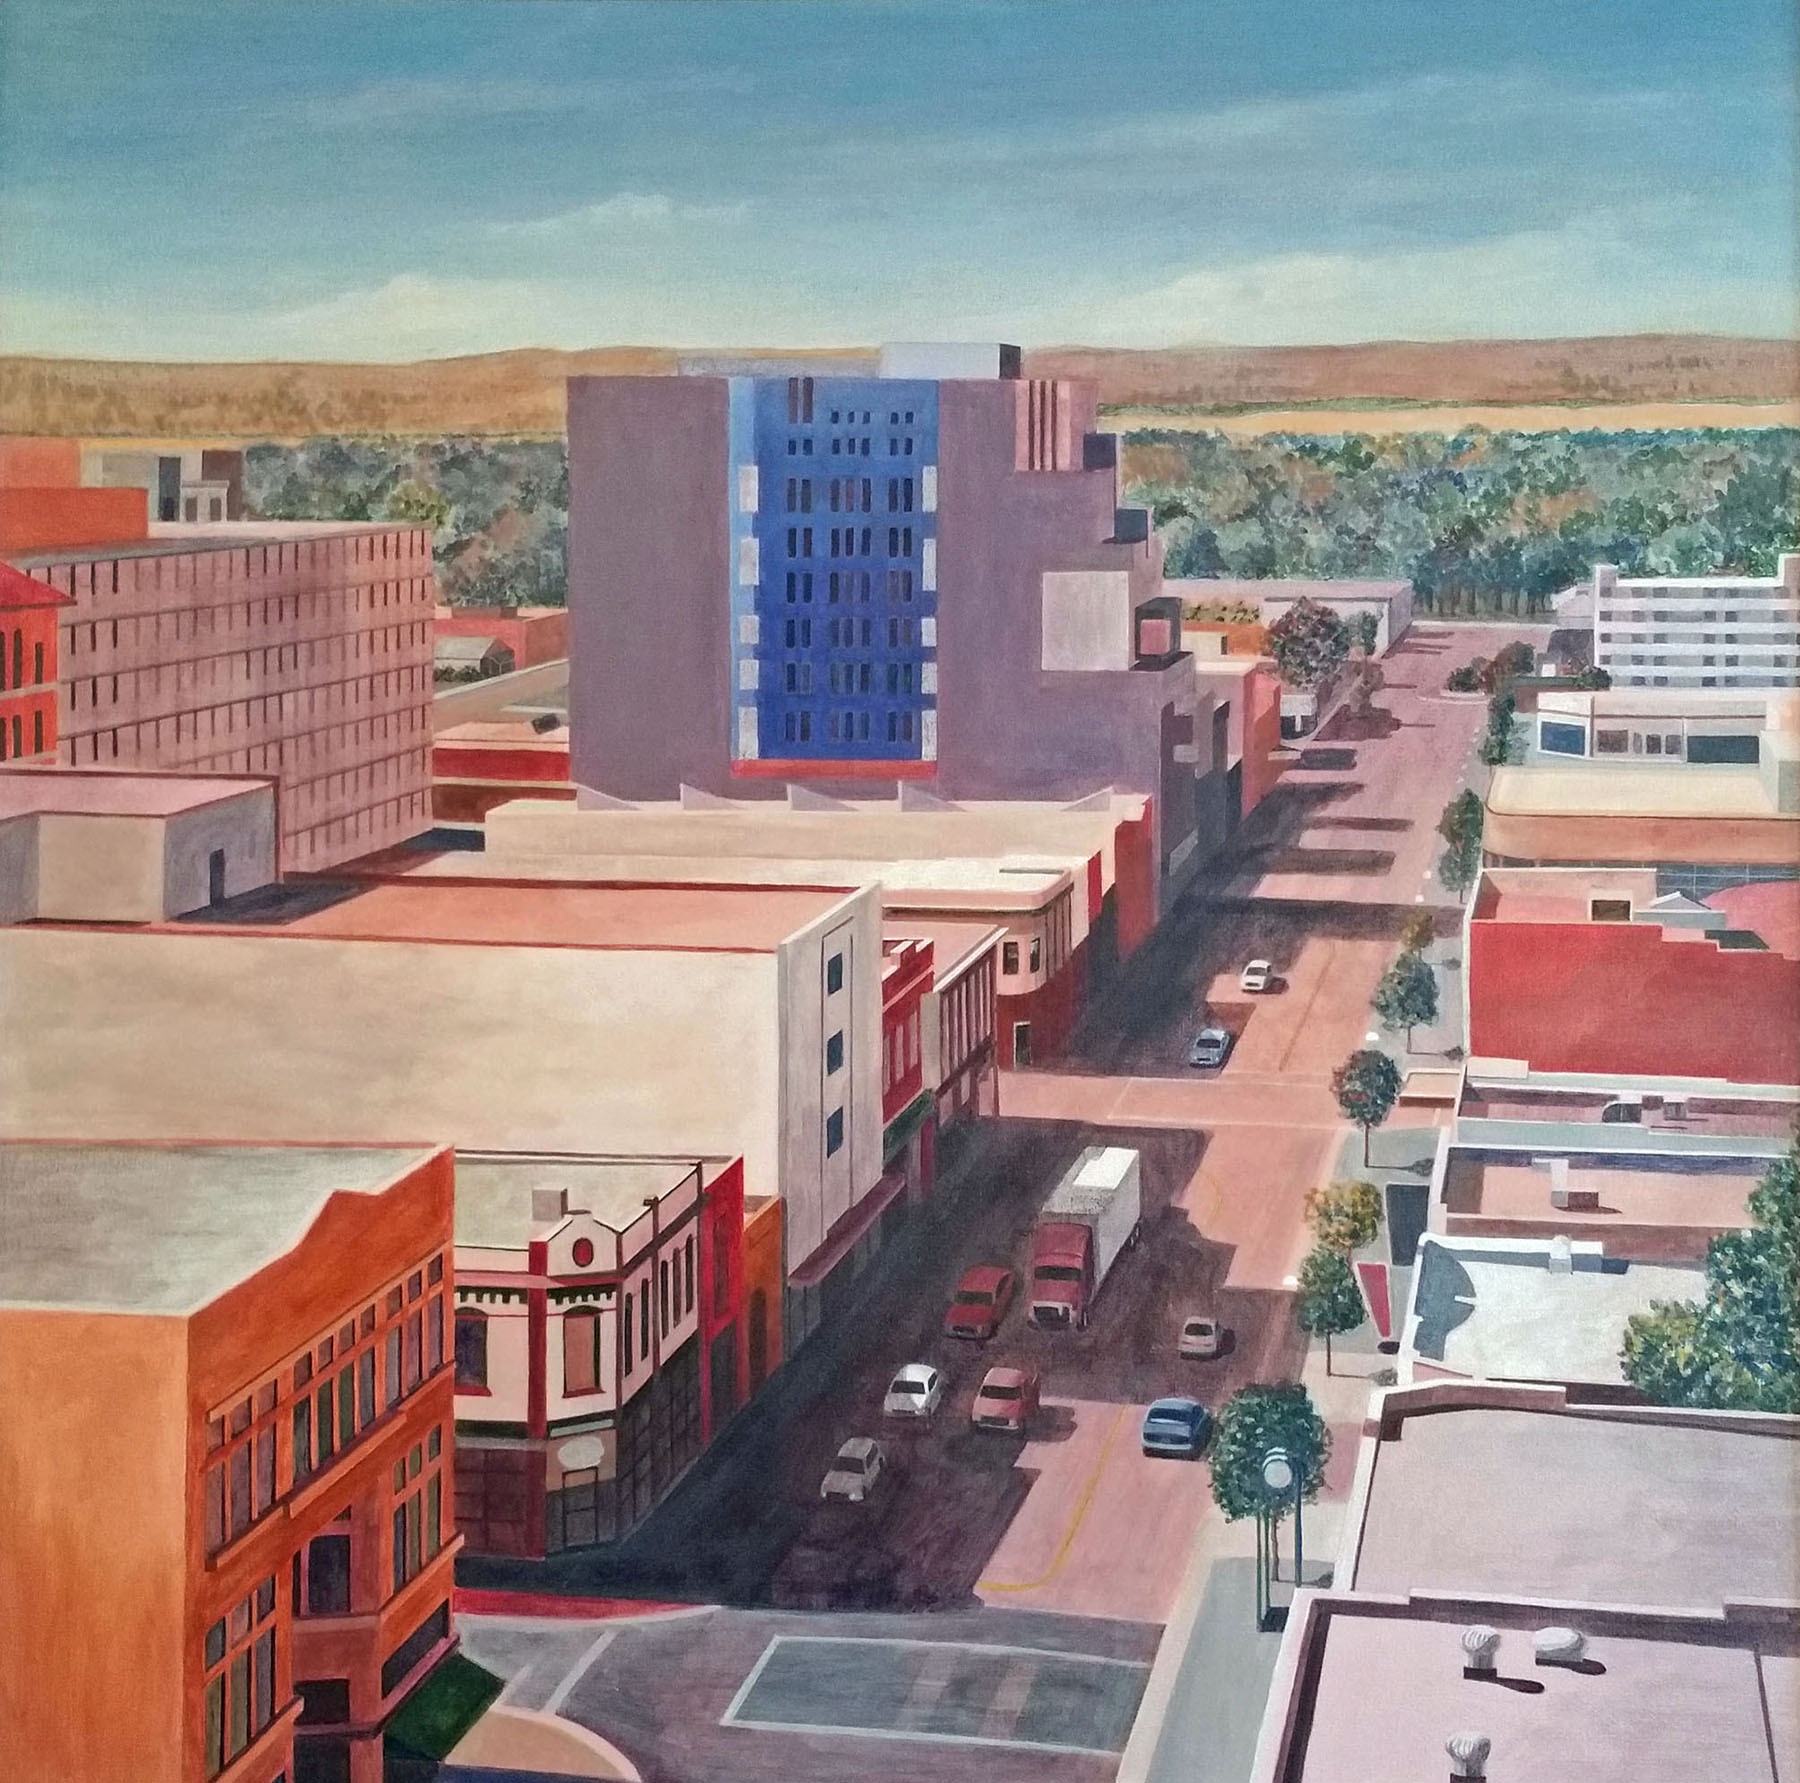 New Mexico Cancer Center, Gallery With A Cause, Chuck Gibbon